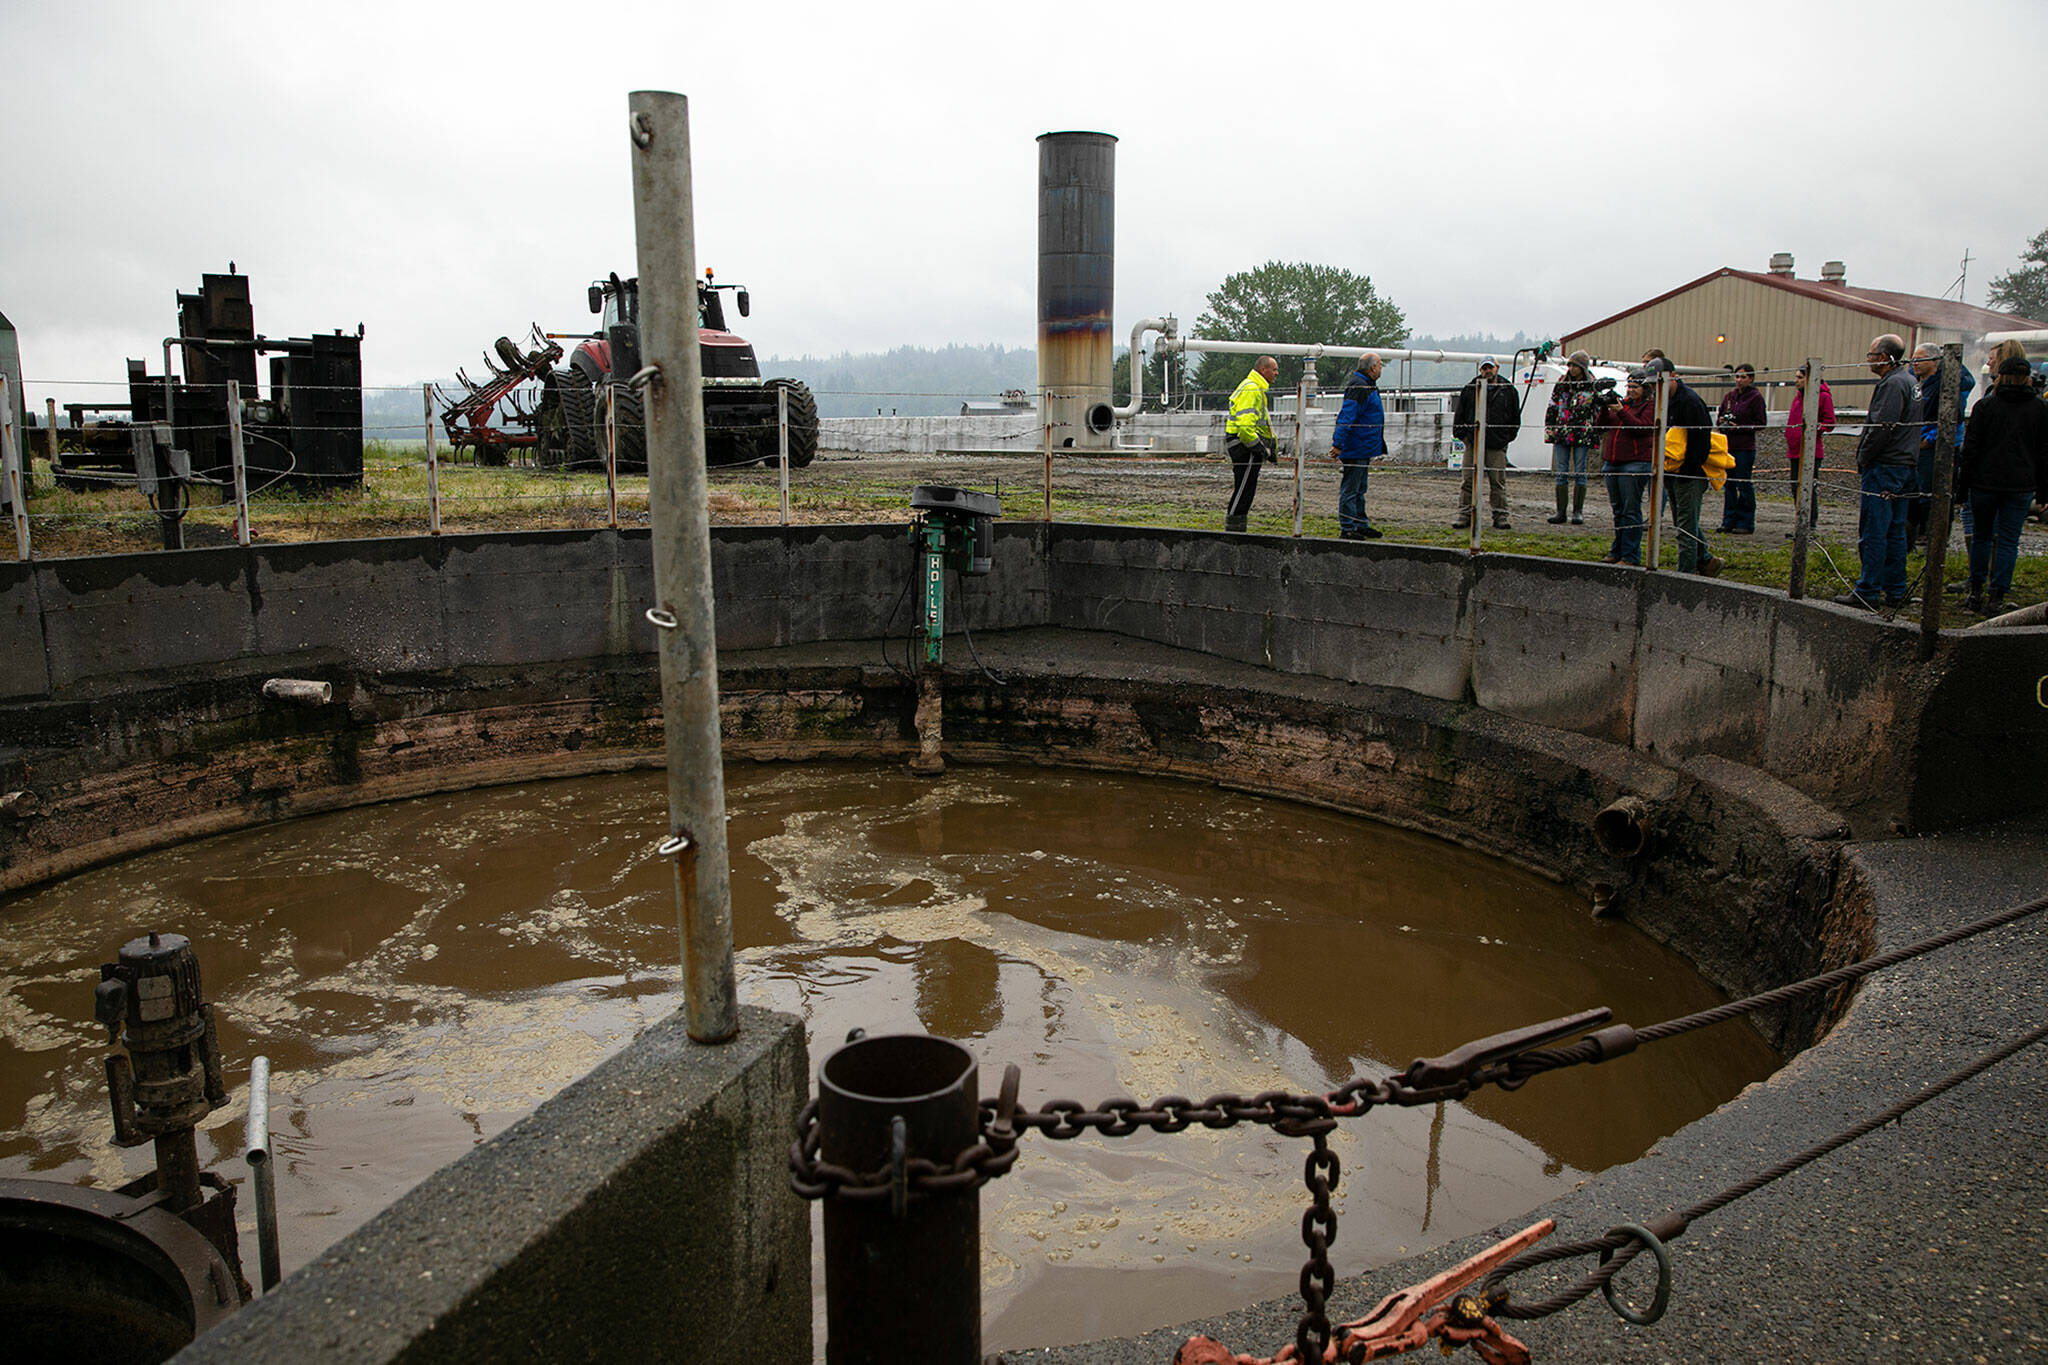 A group gathers near a blending pit, which is where cow waste and other biodegradable material begins its journey towards becoming energy in a digester on June 17 in Monroe. (Ryan Berry / The Herald)